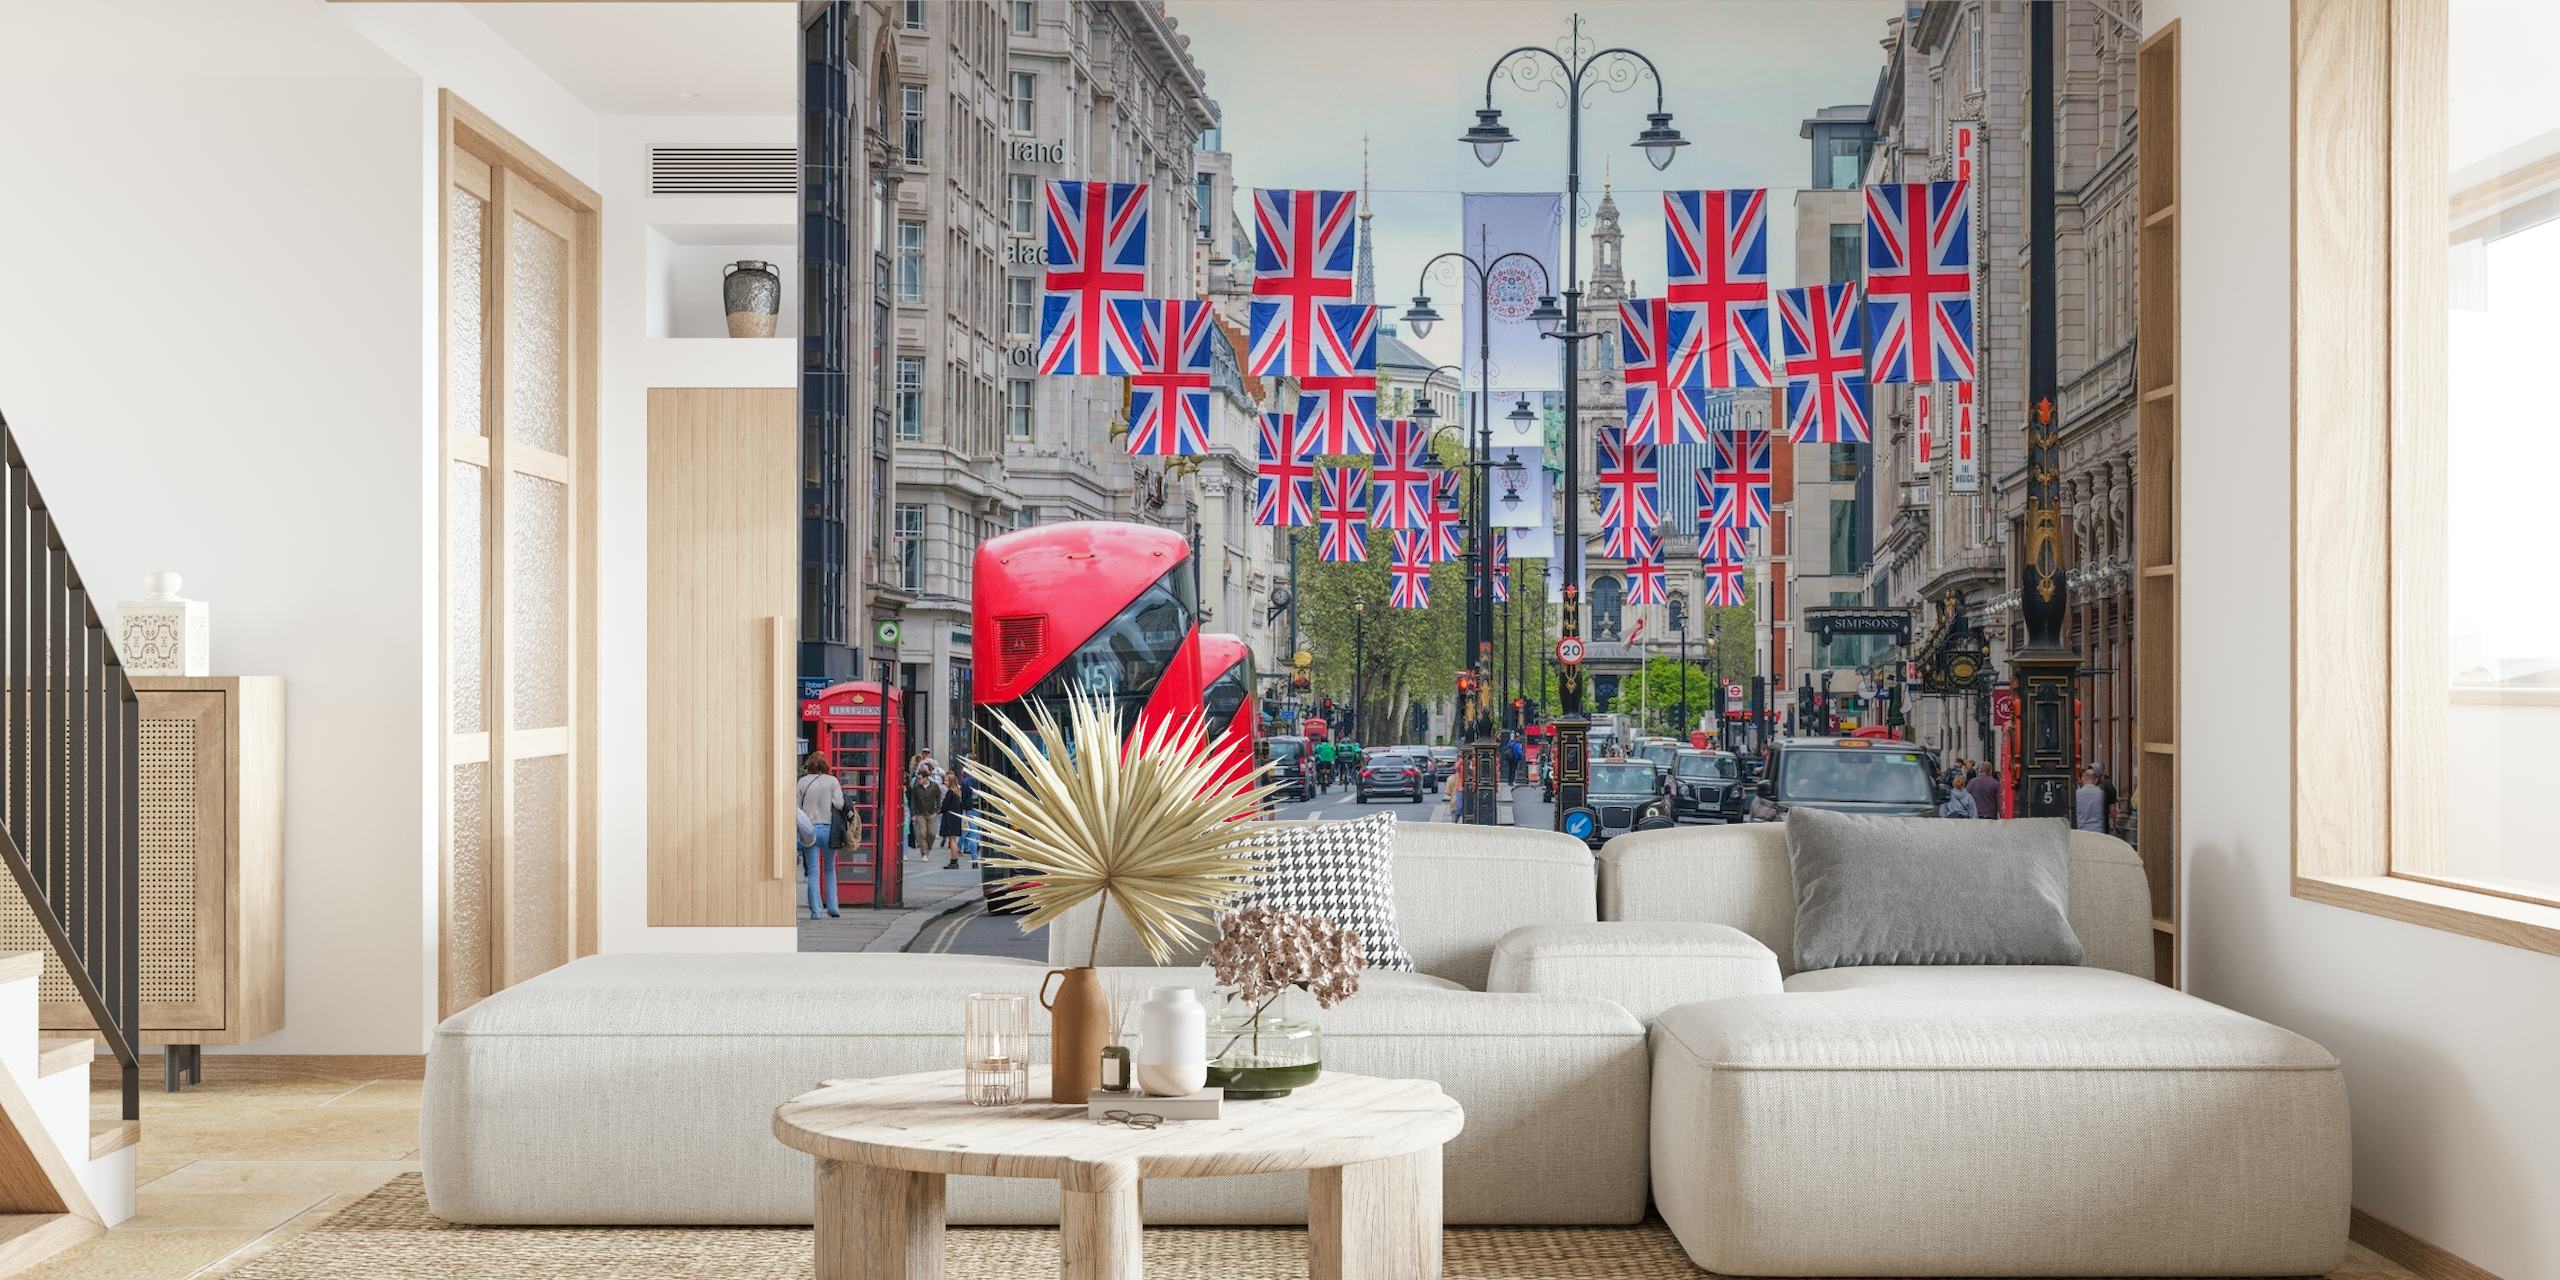 London street scene with Union Jack flags and red double-decker bus wall mural